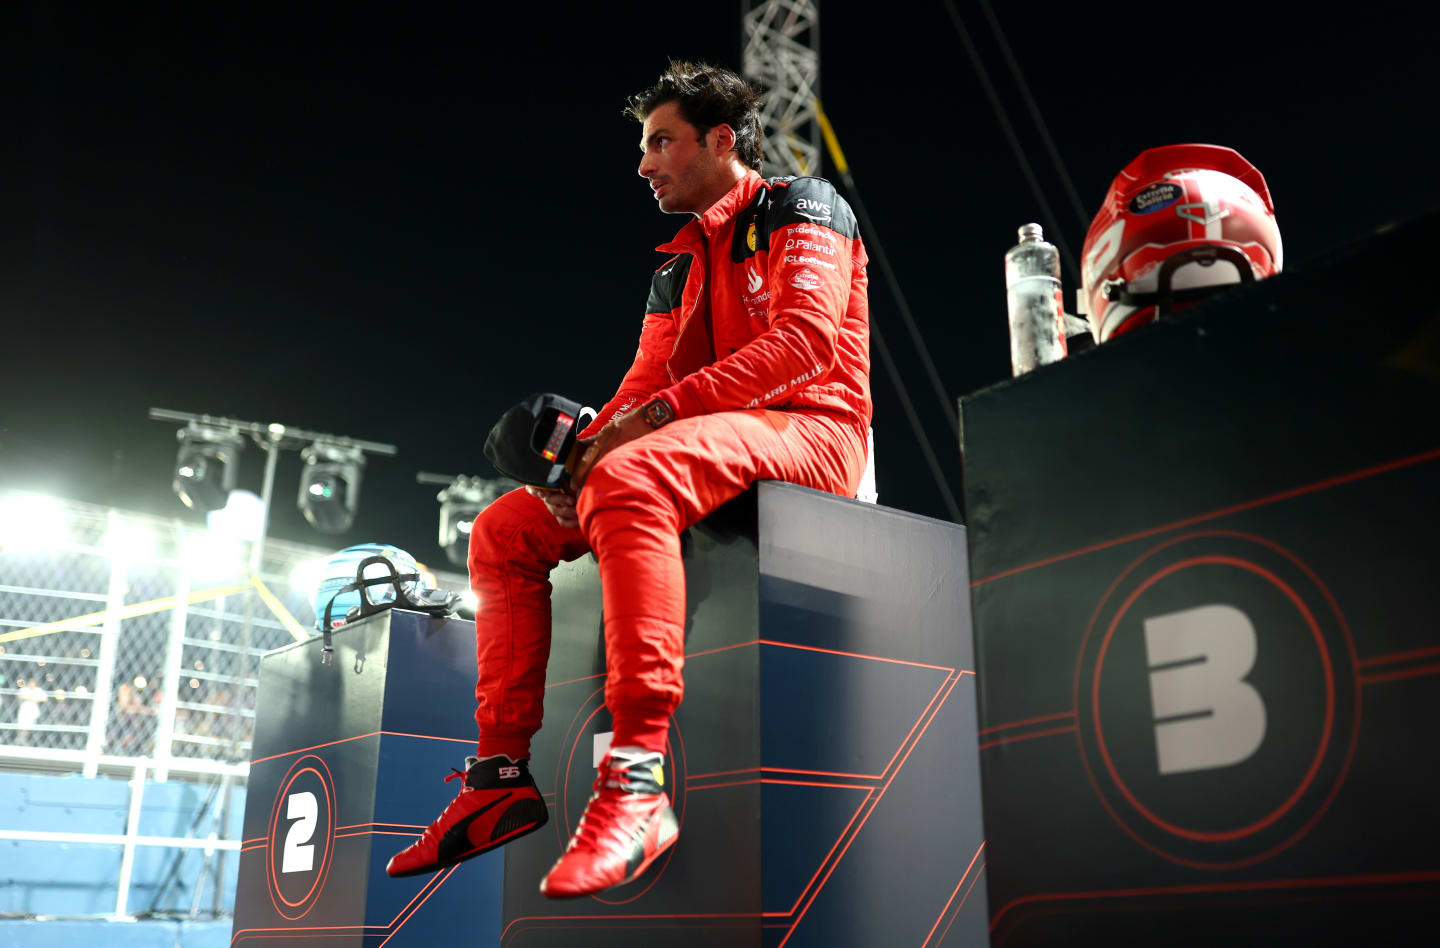 SINGAPORE, SINGAPORE - SEPTEMBER 16: Pole position qualifier Carlos Sainz of Spain and Ferrari looks on in parc ferme during qualifying ahead of the F1 Grand Prix of Singapore at Marina Bay Street Circuit on September 16, 2023 in Singapore, Singapore. (Photo by Dan Istitene - Formula 1/Formula 1 via Getty Images)